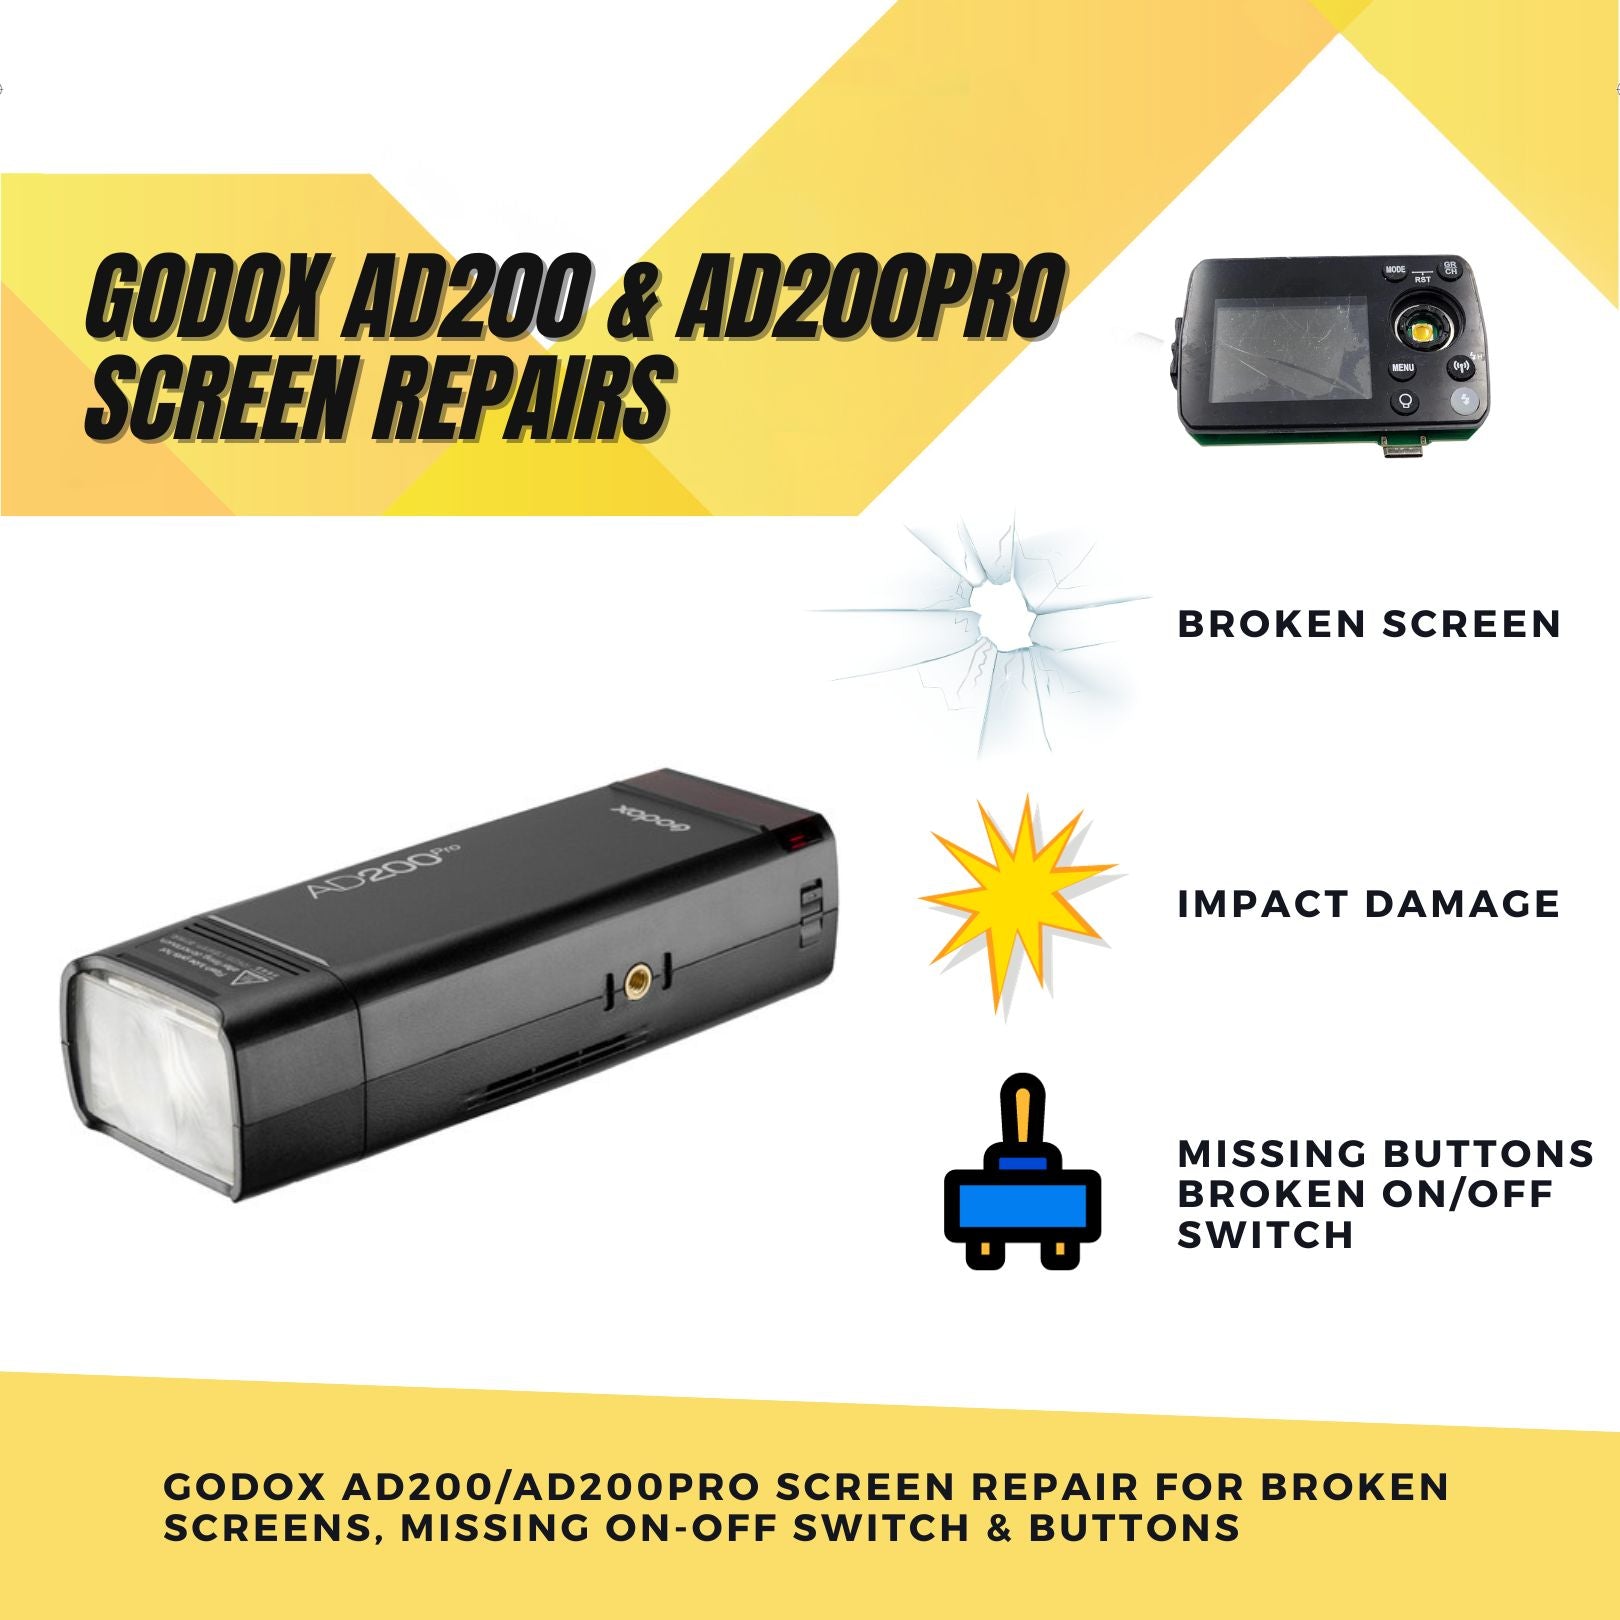 Godox Ad200 Vs Ad200Pro: Which Is The Better Buy?